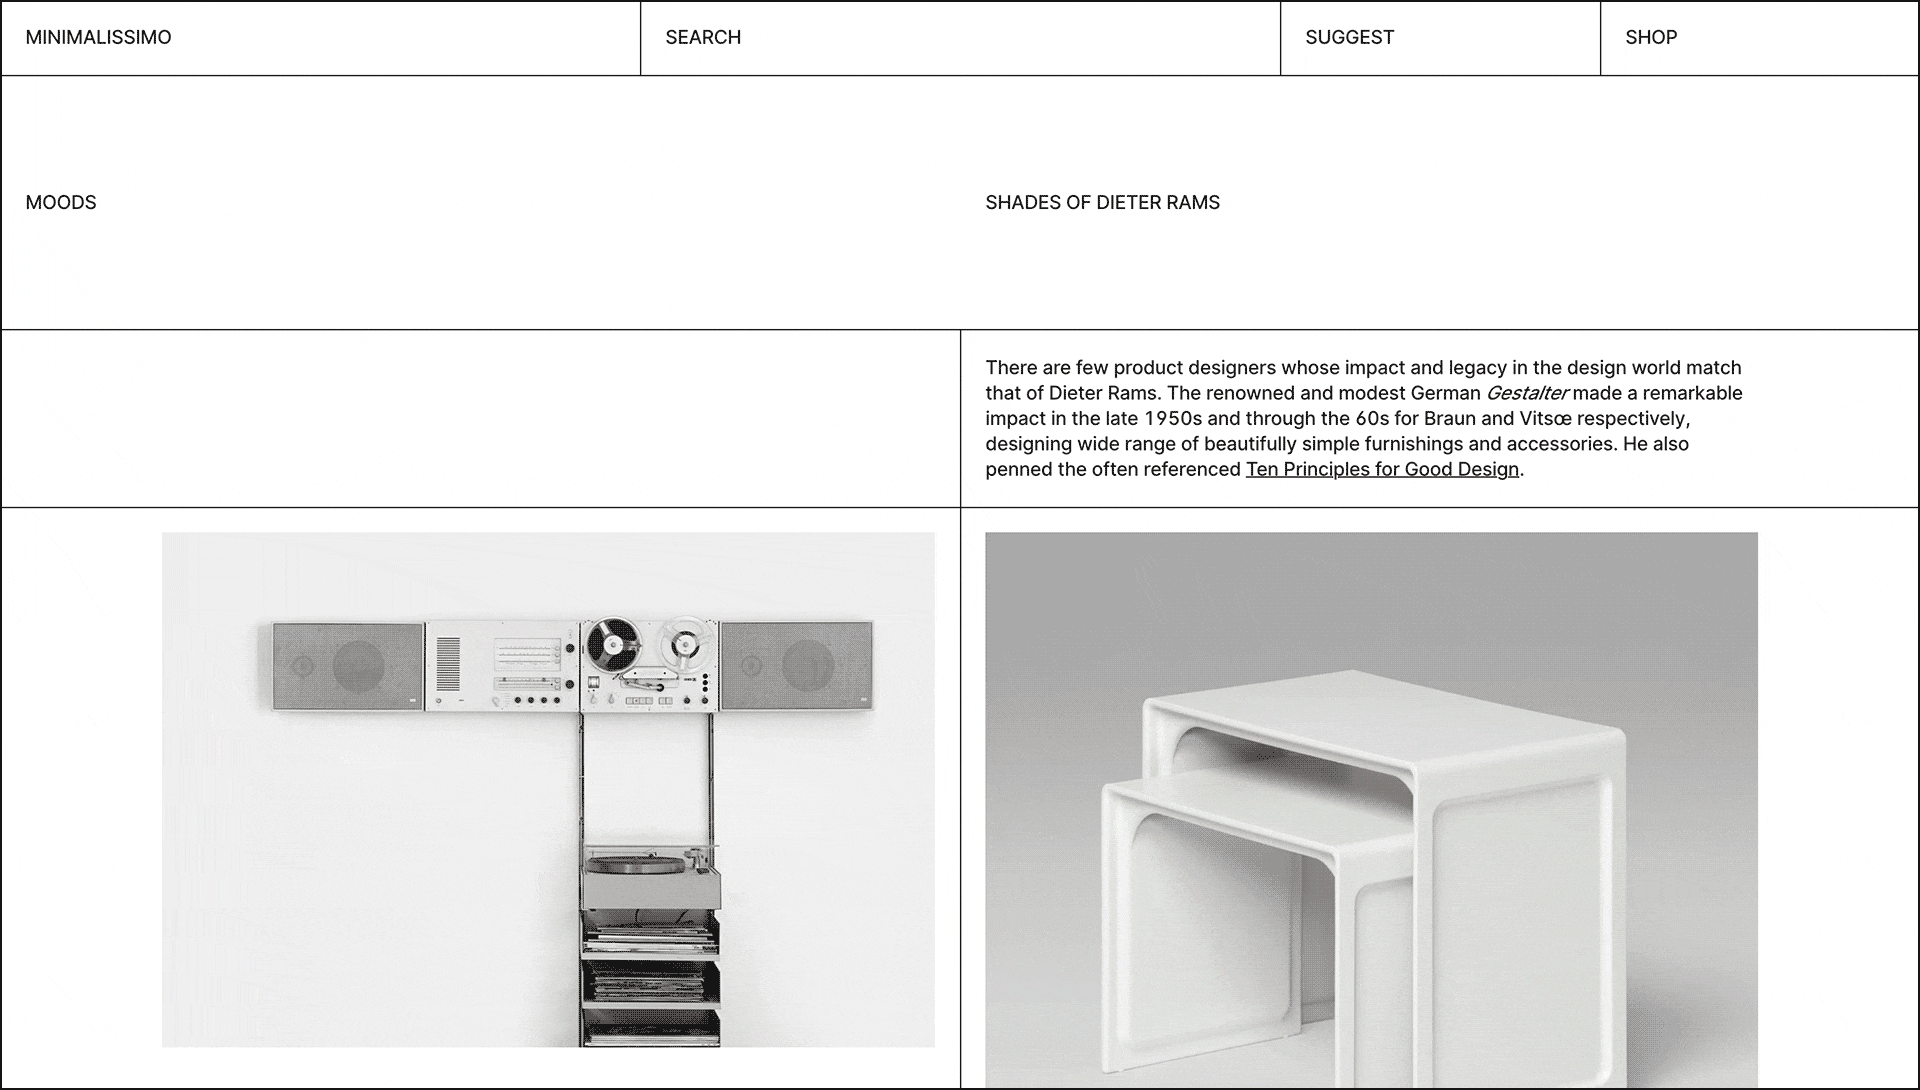 Moodboard "Shades of Dieter Rams" on Minimalissimo